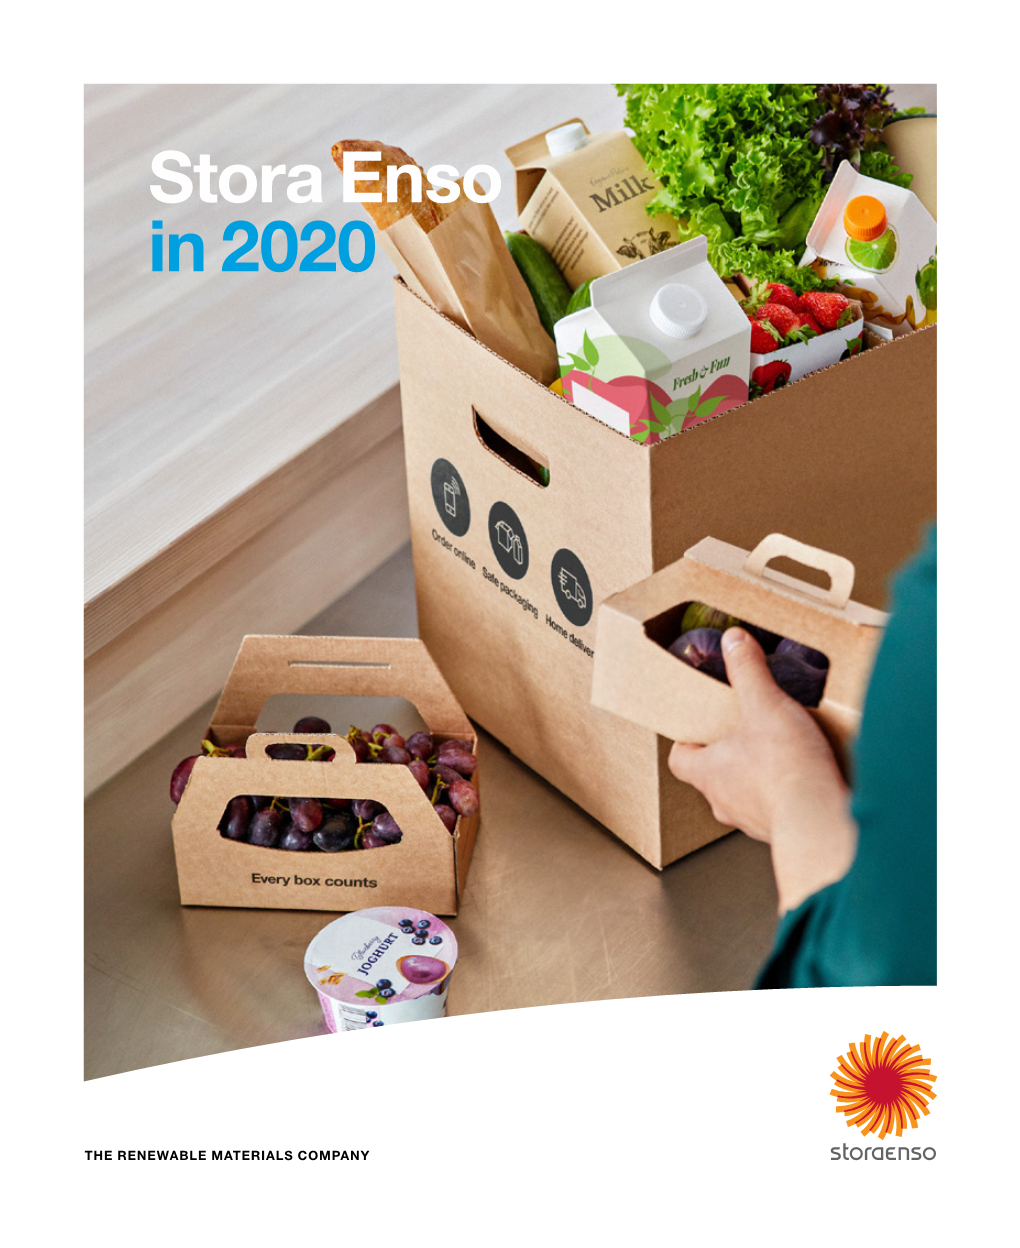 Stora Enso in 2020 We Want to Support Industries, Producers and Retailers in Meeting the Growing Demand for Eco- Friendly and Circular Solutions